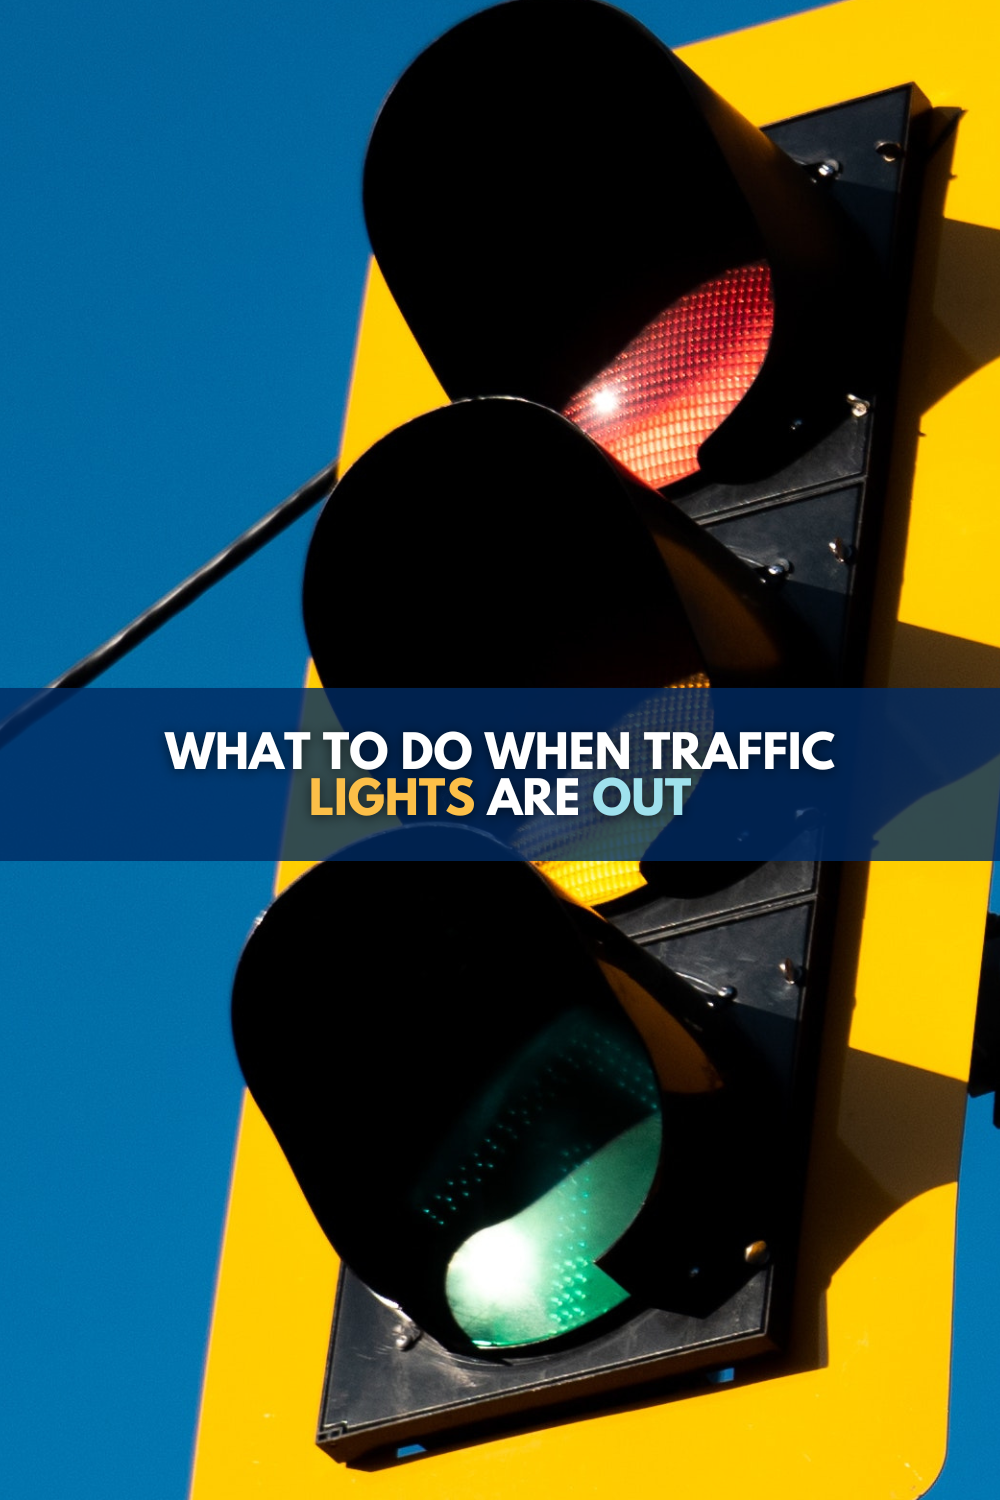 What To Do When Traffic Lights Are Out